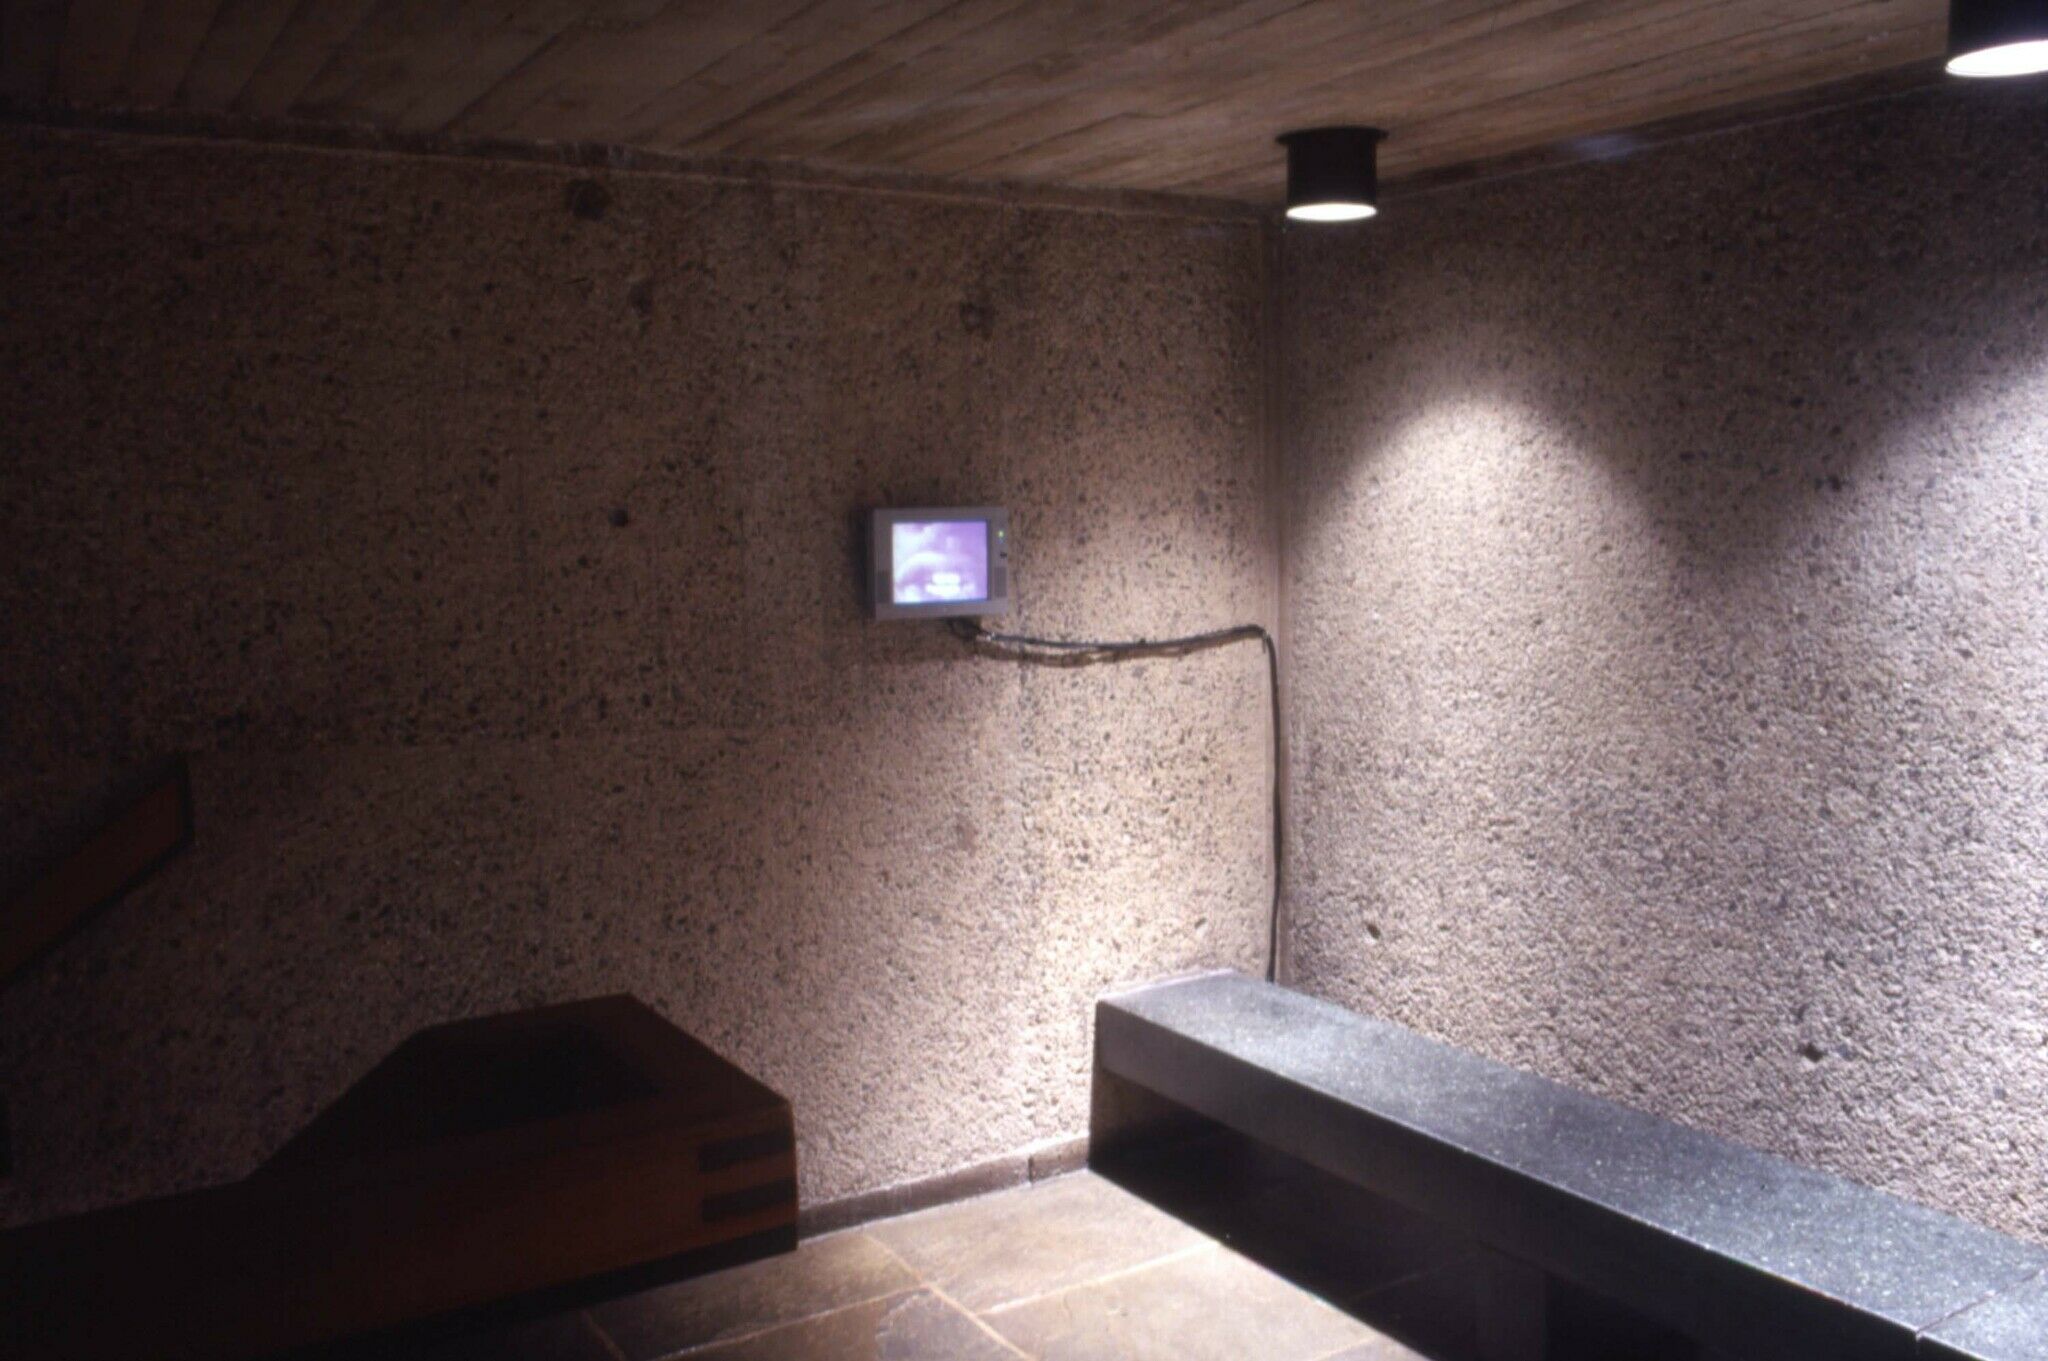 A dimly lit gallery space with a small monitor on a wall.